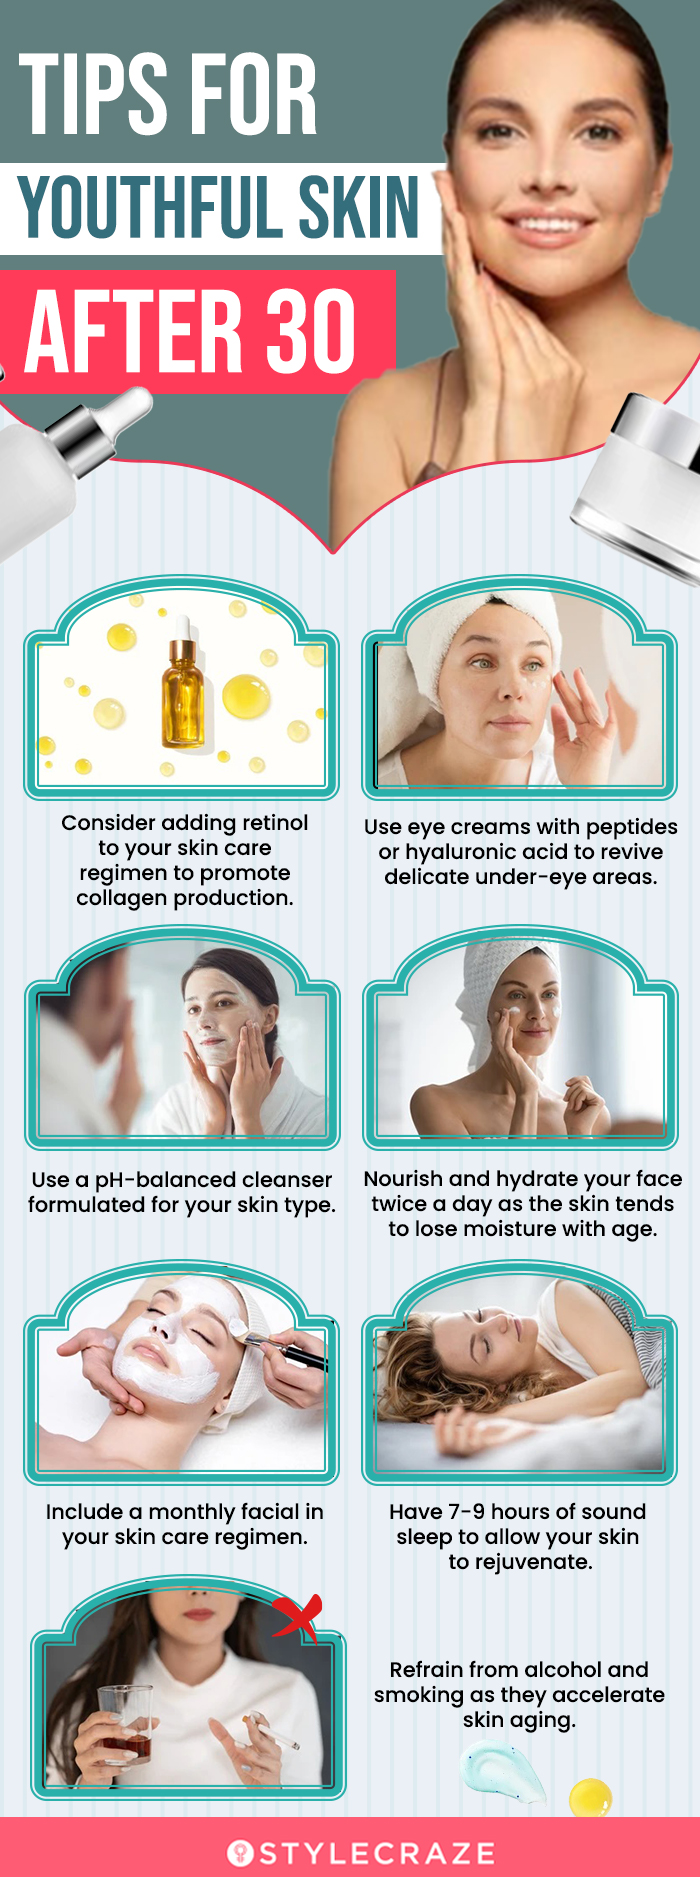 Tips For Youthful Skin After 30(infographic)